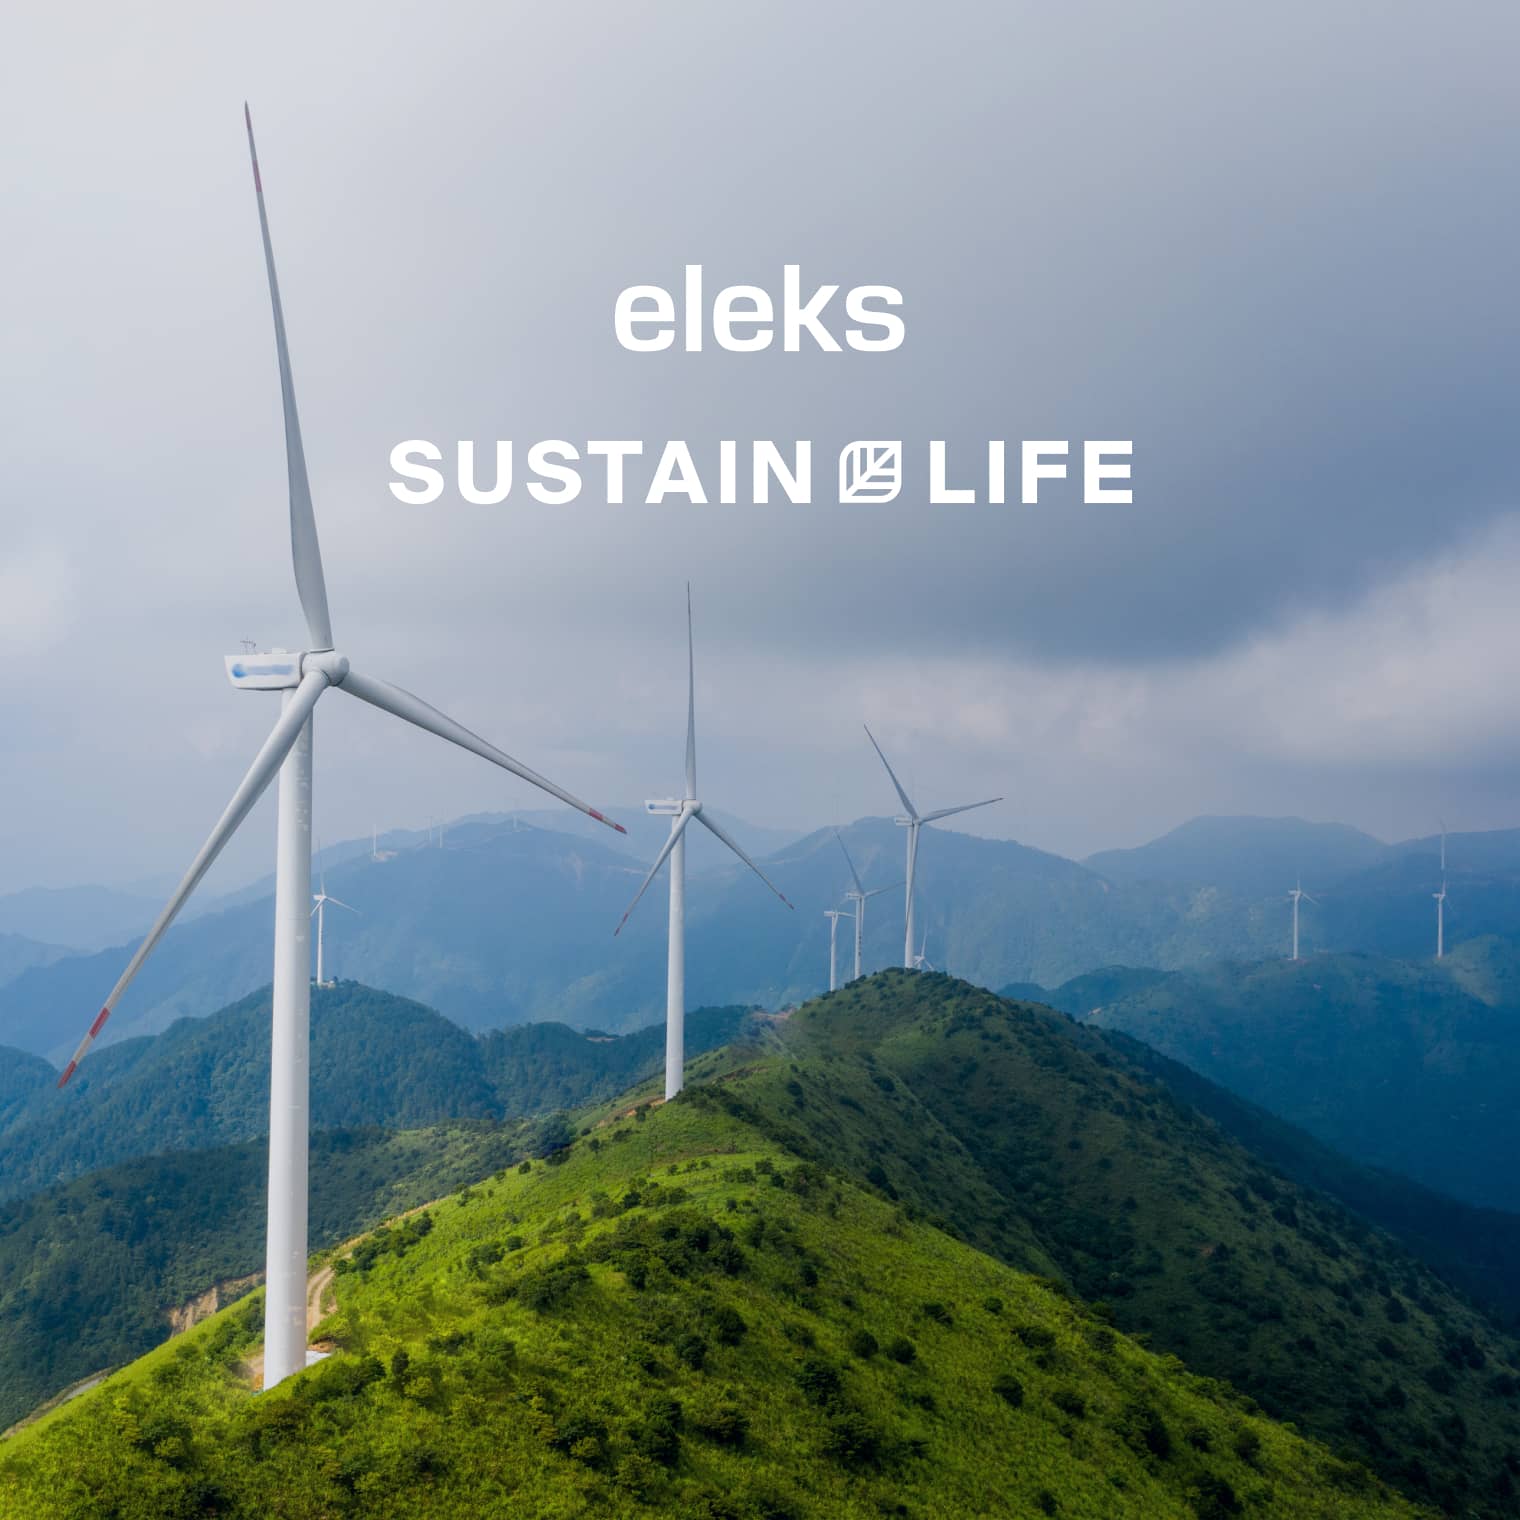 ELEKS and Sustain.Life Announce Strategic Partnership to Bring Carbon Accounting and ESG Management Services to Clients